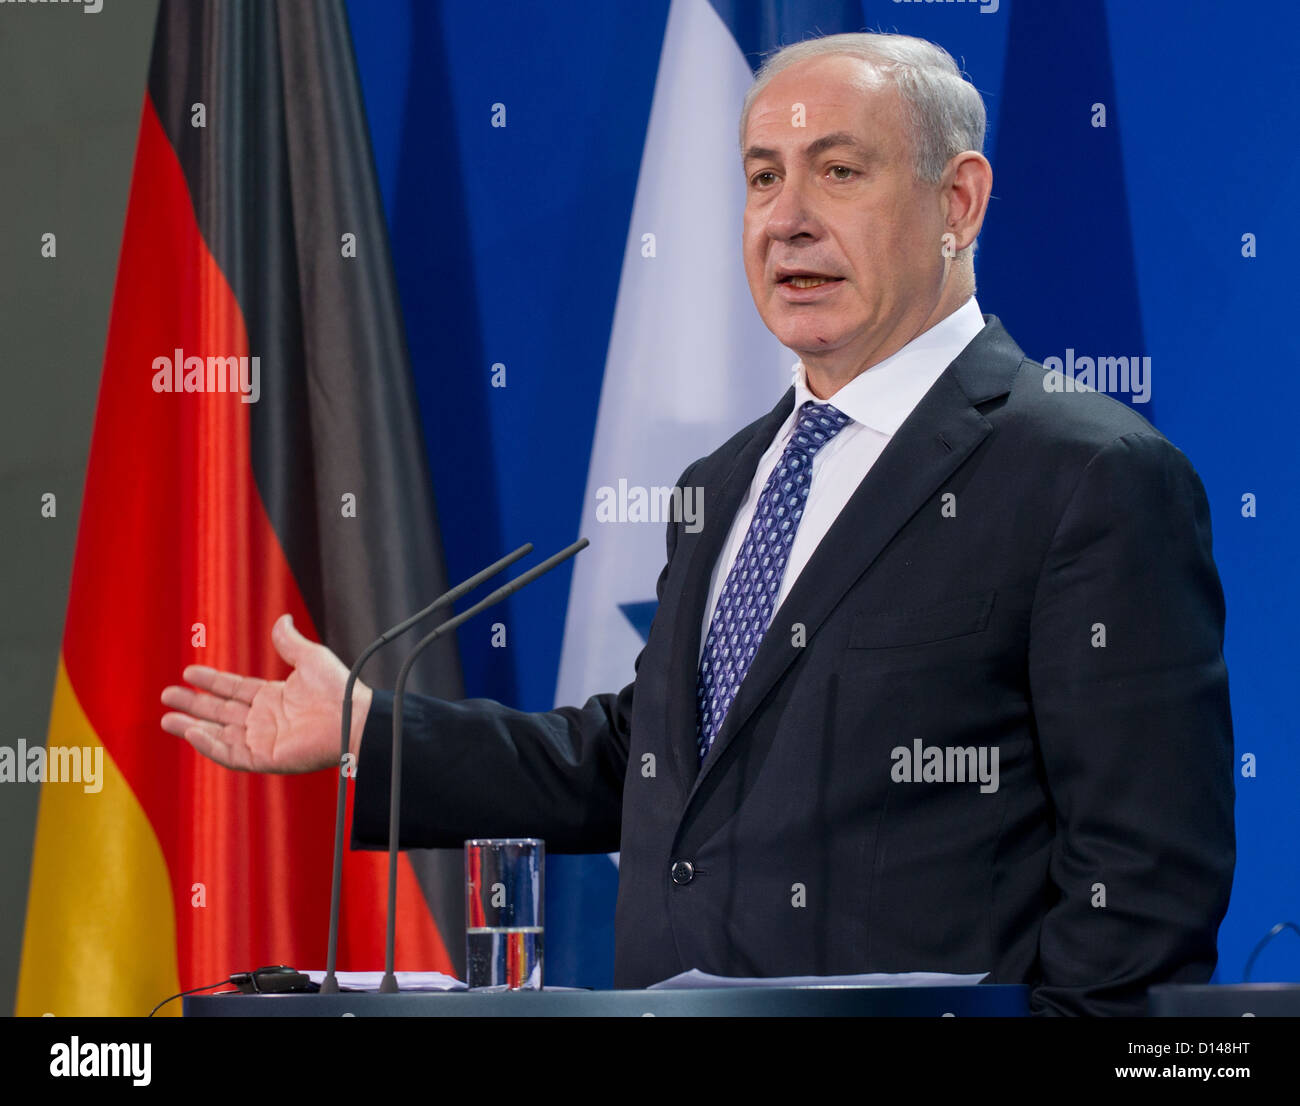 Israeli Prime Minister Benjamin Netanyahu gives a press conference at the chancellery in Berlin, Germany, 06 December 2012. Netanyahu's visit to Germany is overshadowed by Israel's plans to build new settler homes in a highly contentious strip of the occupied West Bank near Jerusalem. Photo: TIM BRAKEMEIER Stock Photo